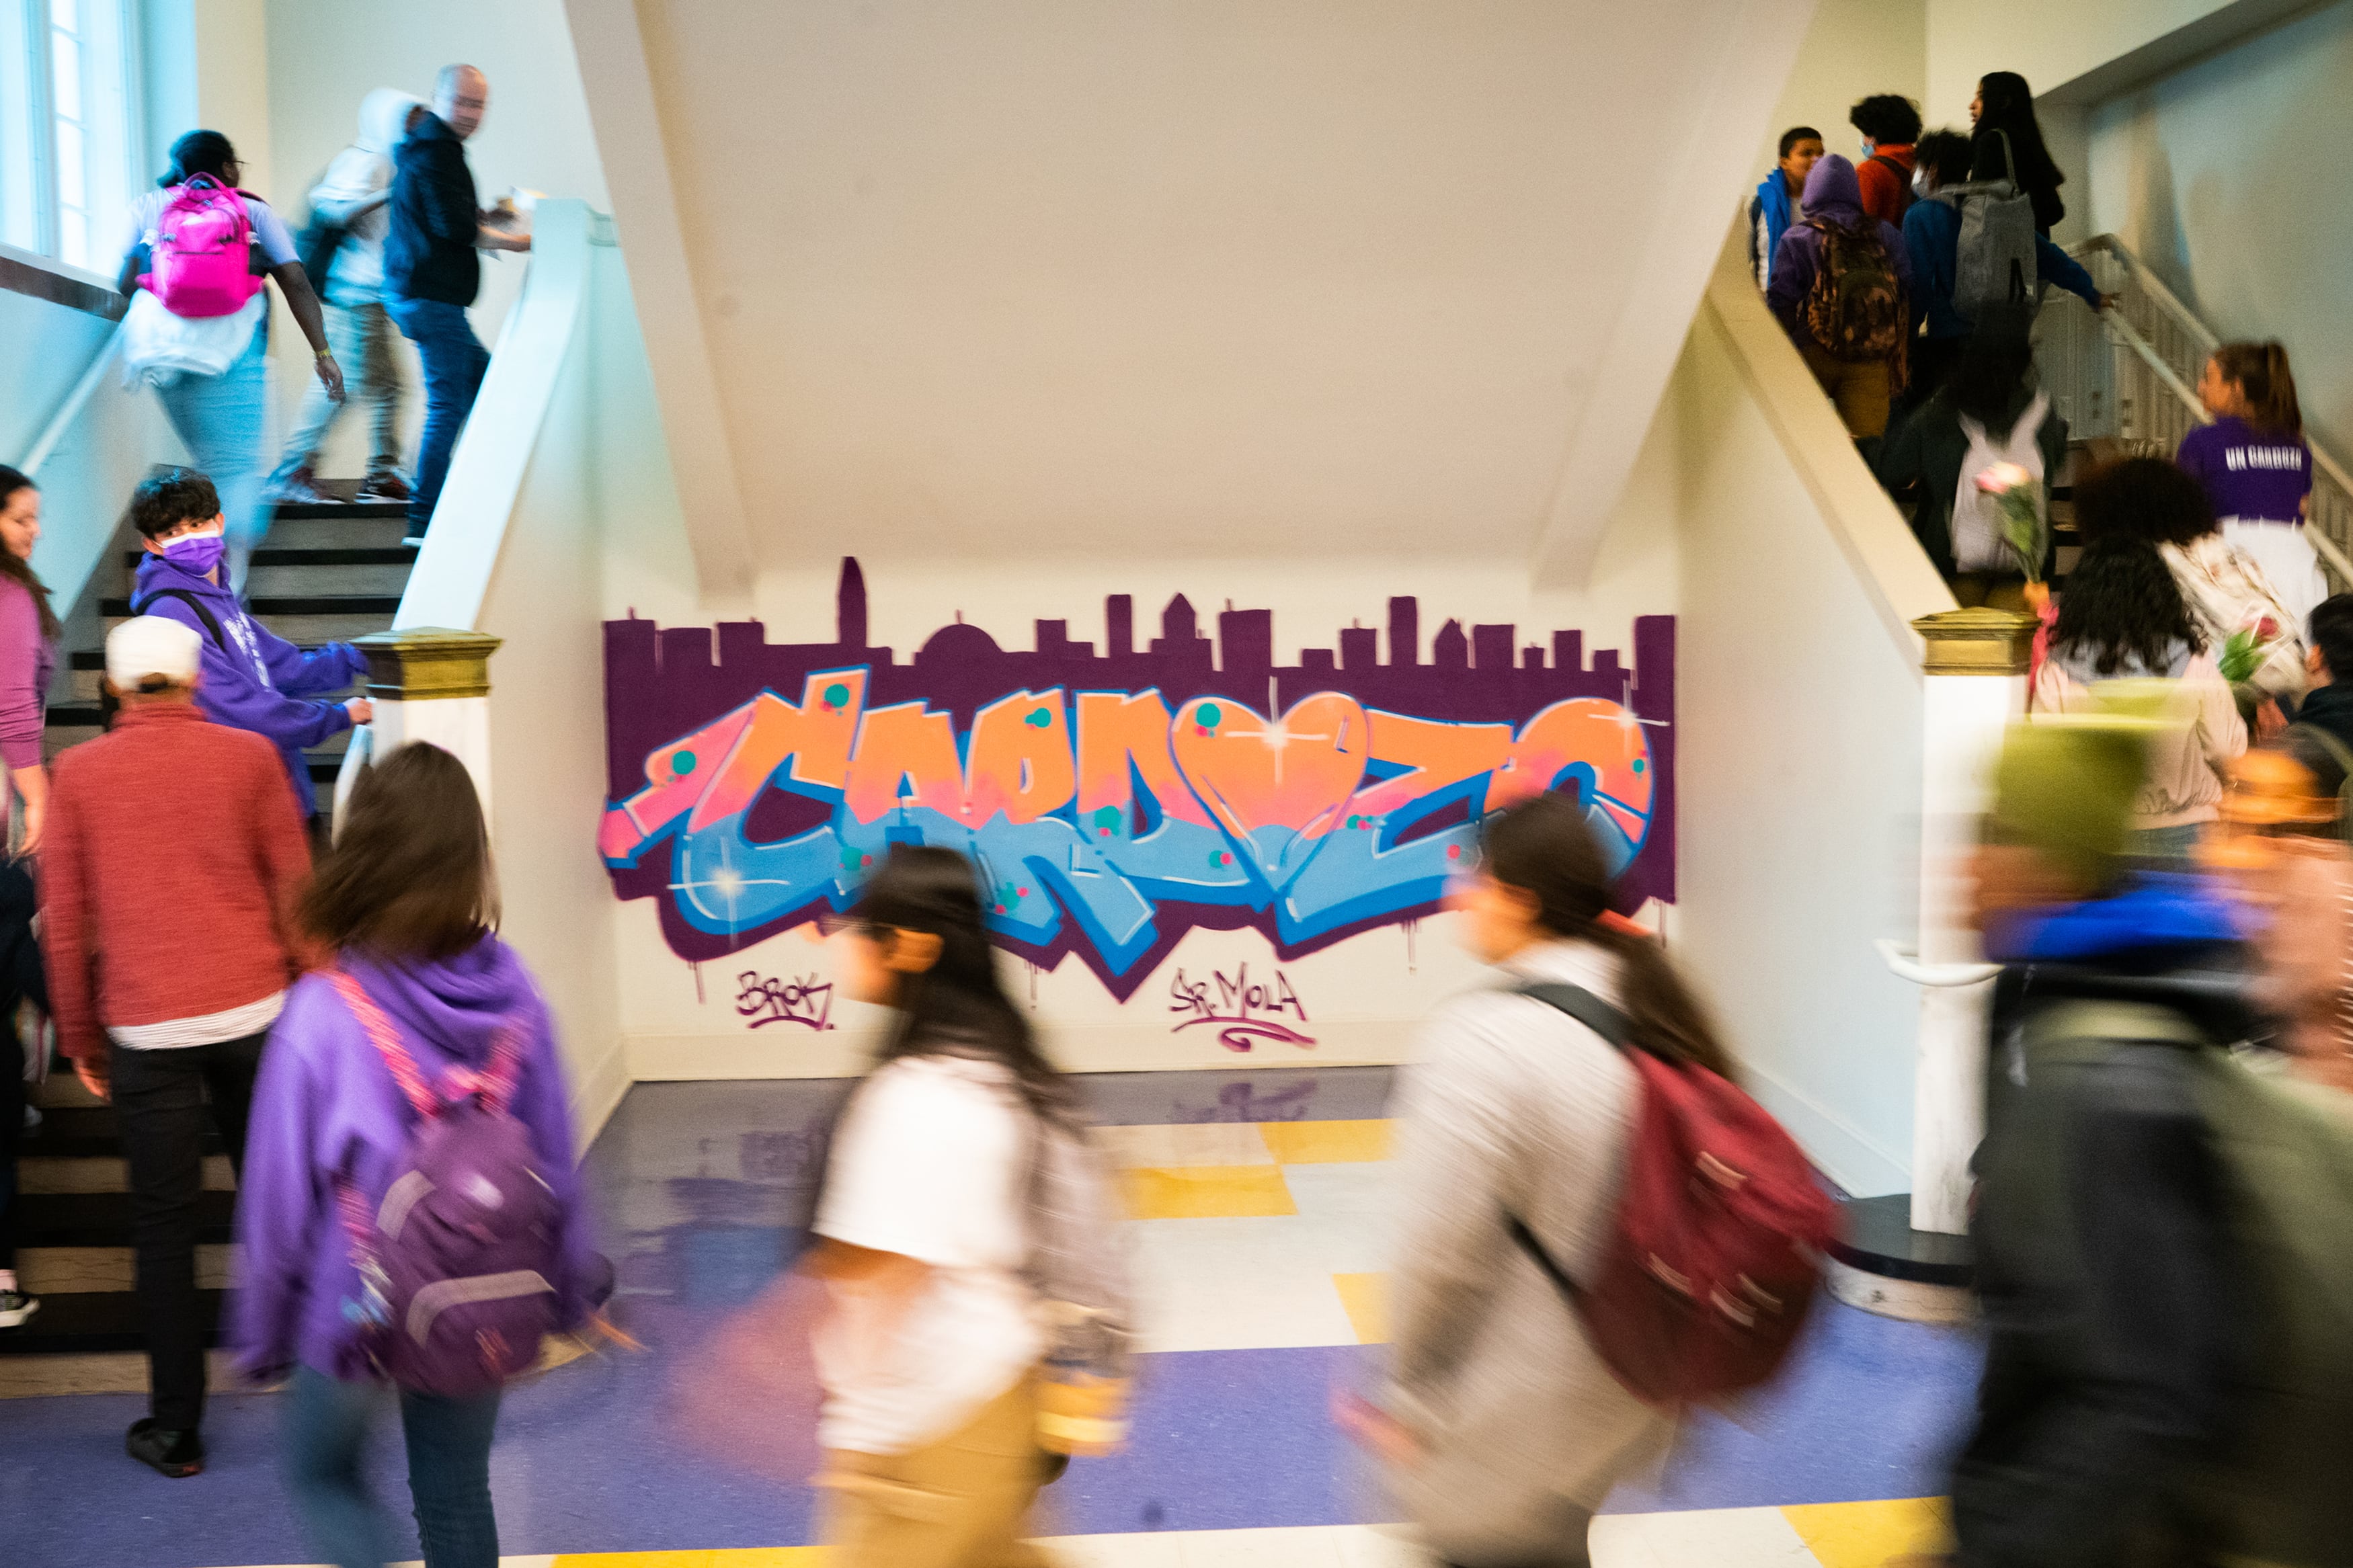 Students walk in a line from one set of stairs to another with a grafiti artwork on the wall in the middle.